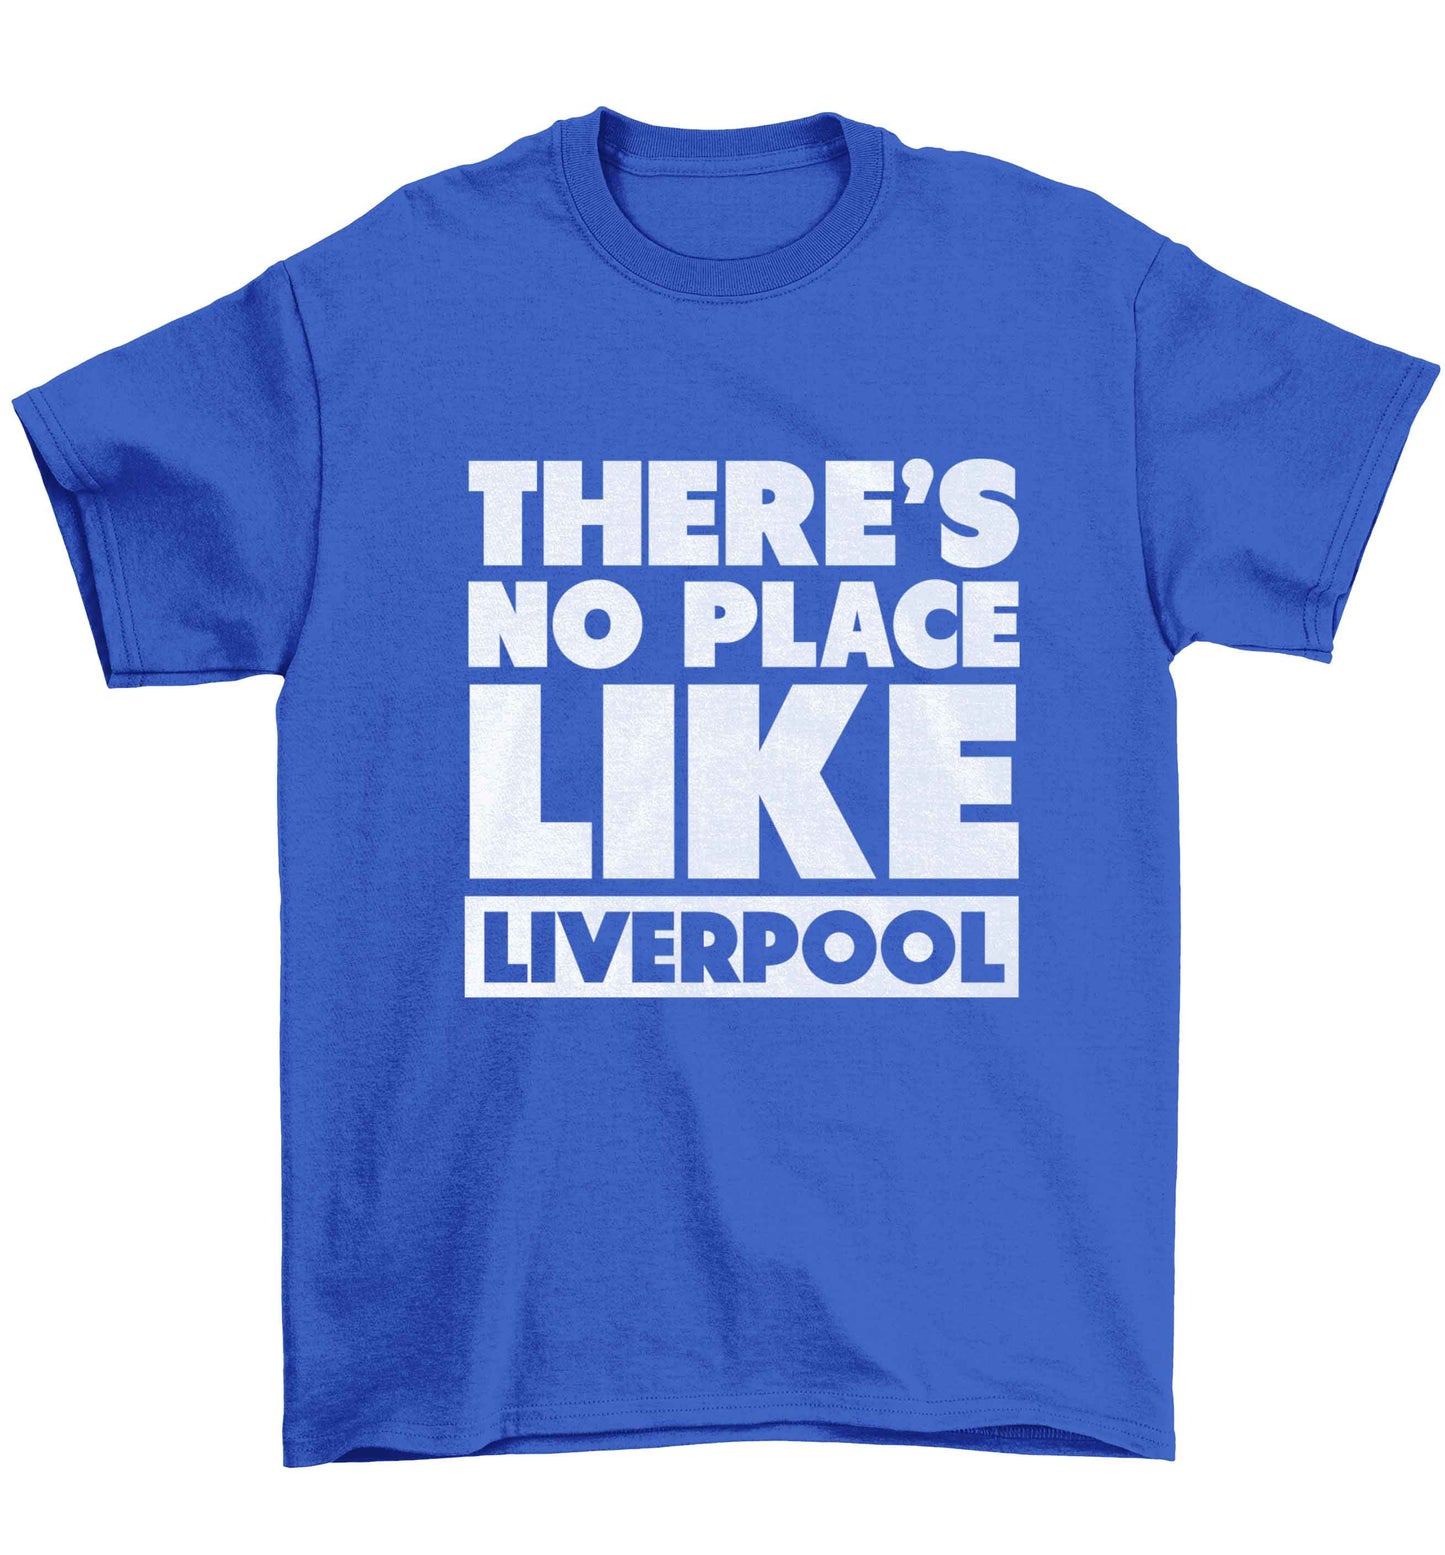 There's no place like Liverpool Children's blue Tshirt 12-13 Years